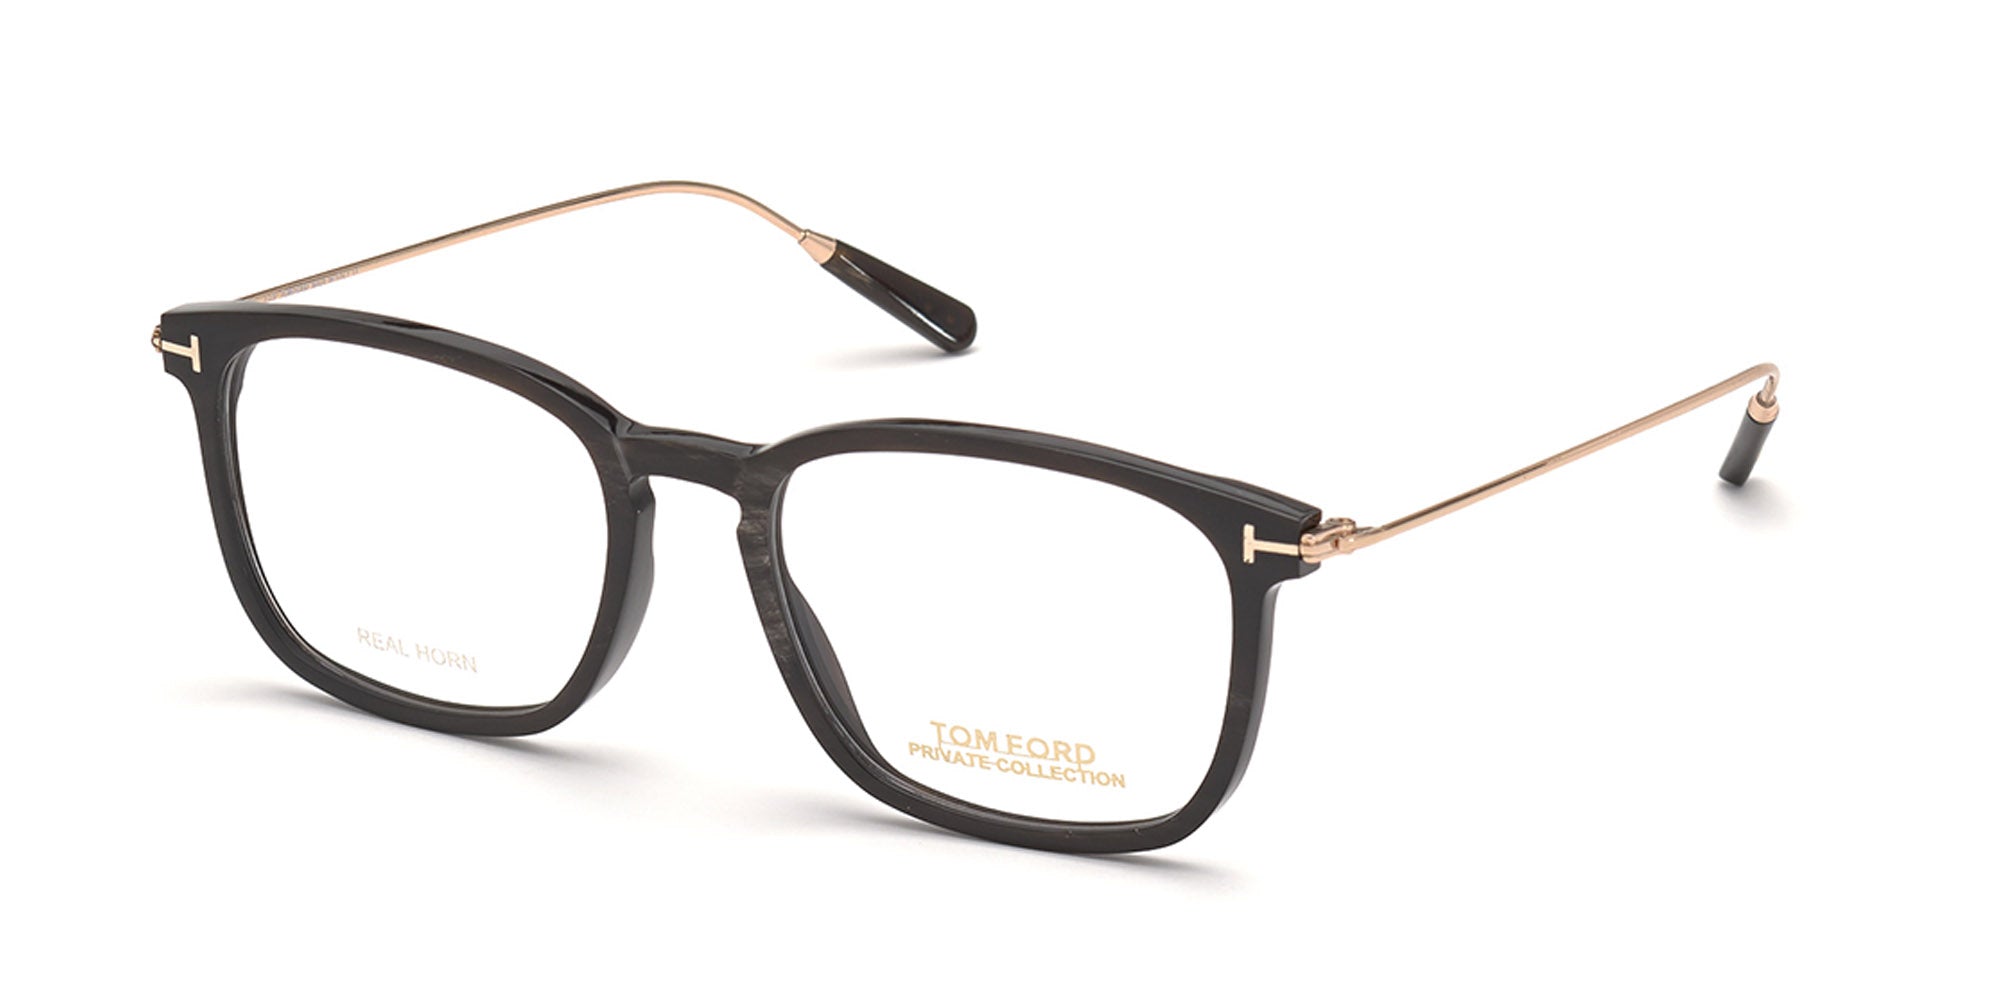 Ford Private Collection TF5722-P Square Glasses | Fashion Eyewear